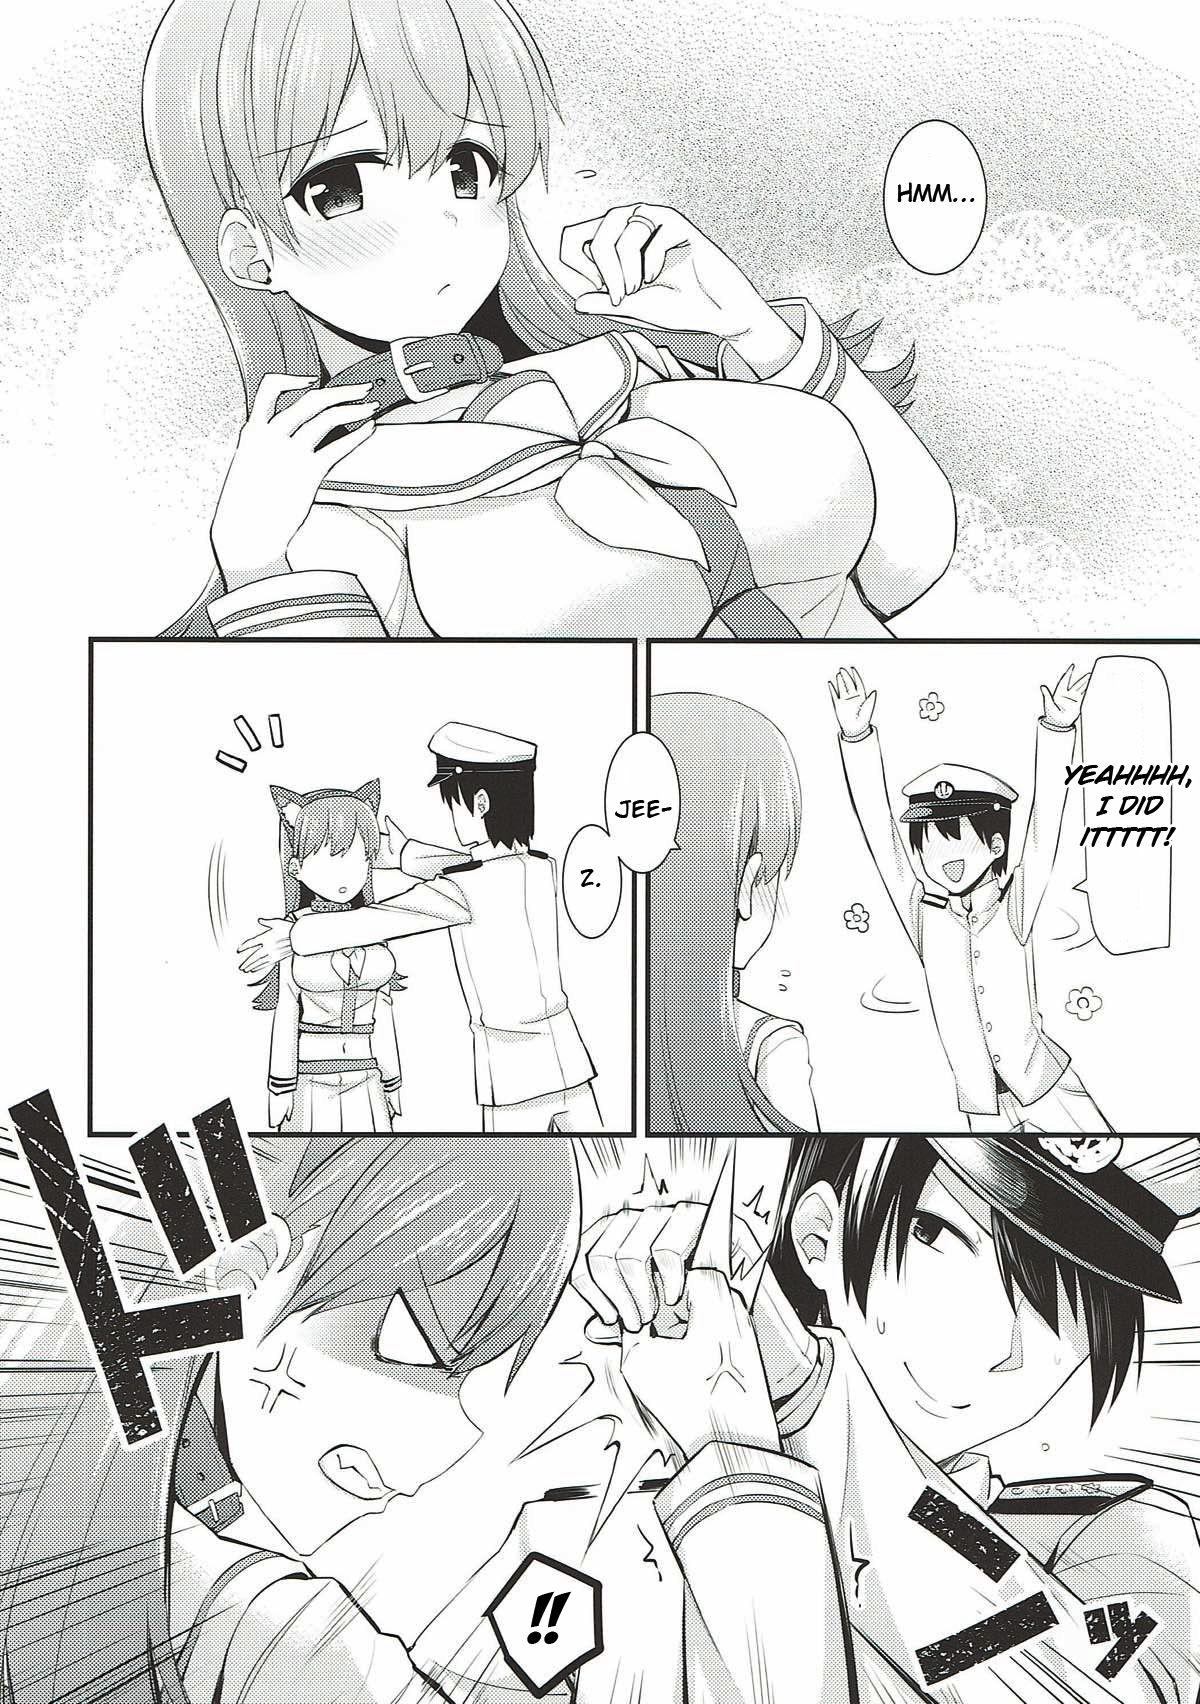 Blowjob Ooi! Nekomimi o Tsukeyou! | Ooi! Put On These Cat Ears! - Kantai collection Hot Girl Porn - Page 7